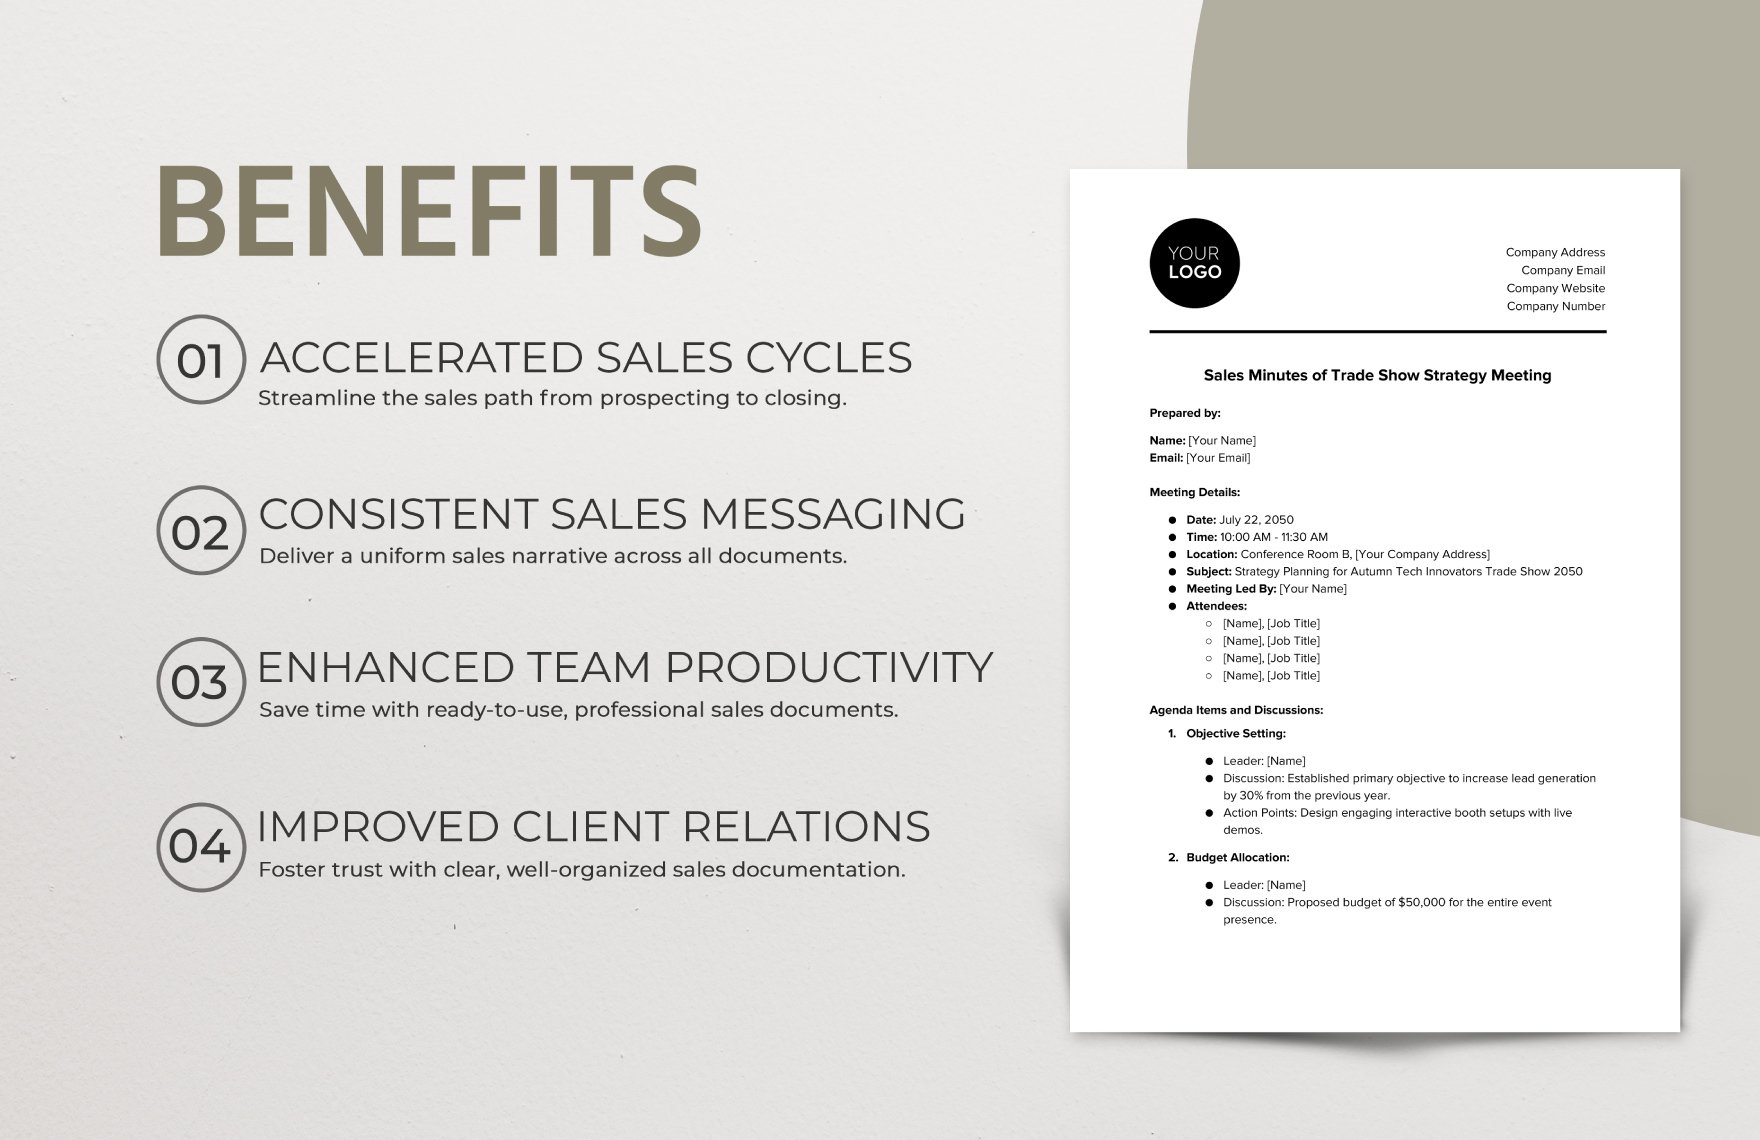 Sales Minute of Trade Show Strategy Meeting Template